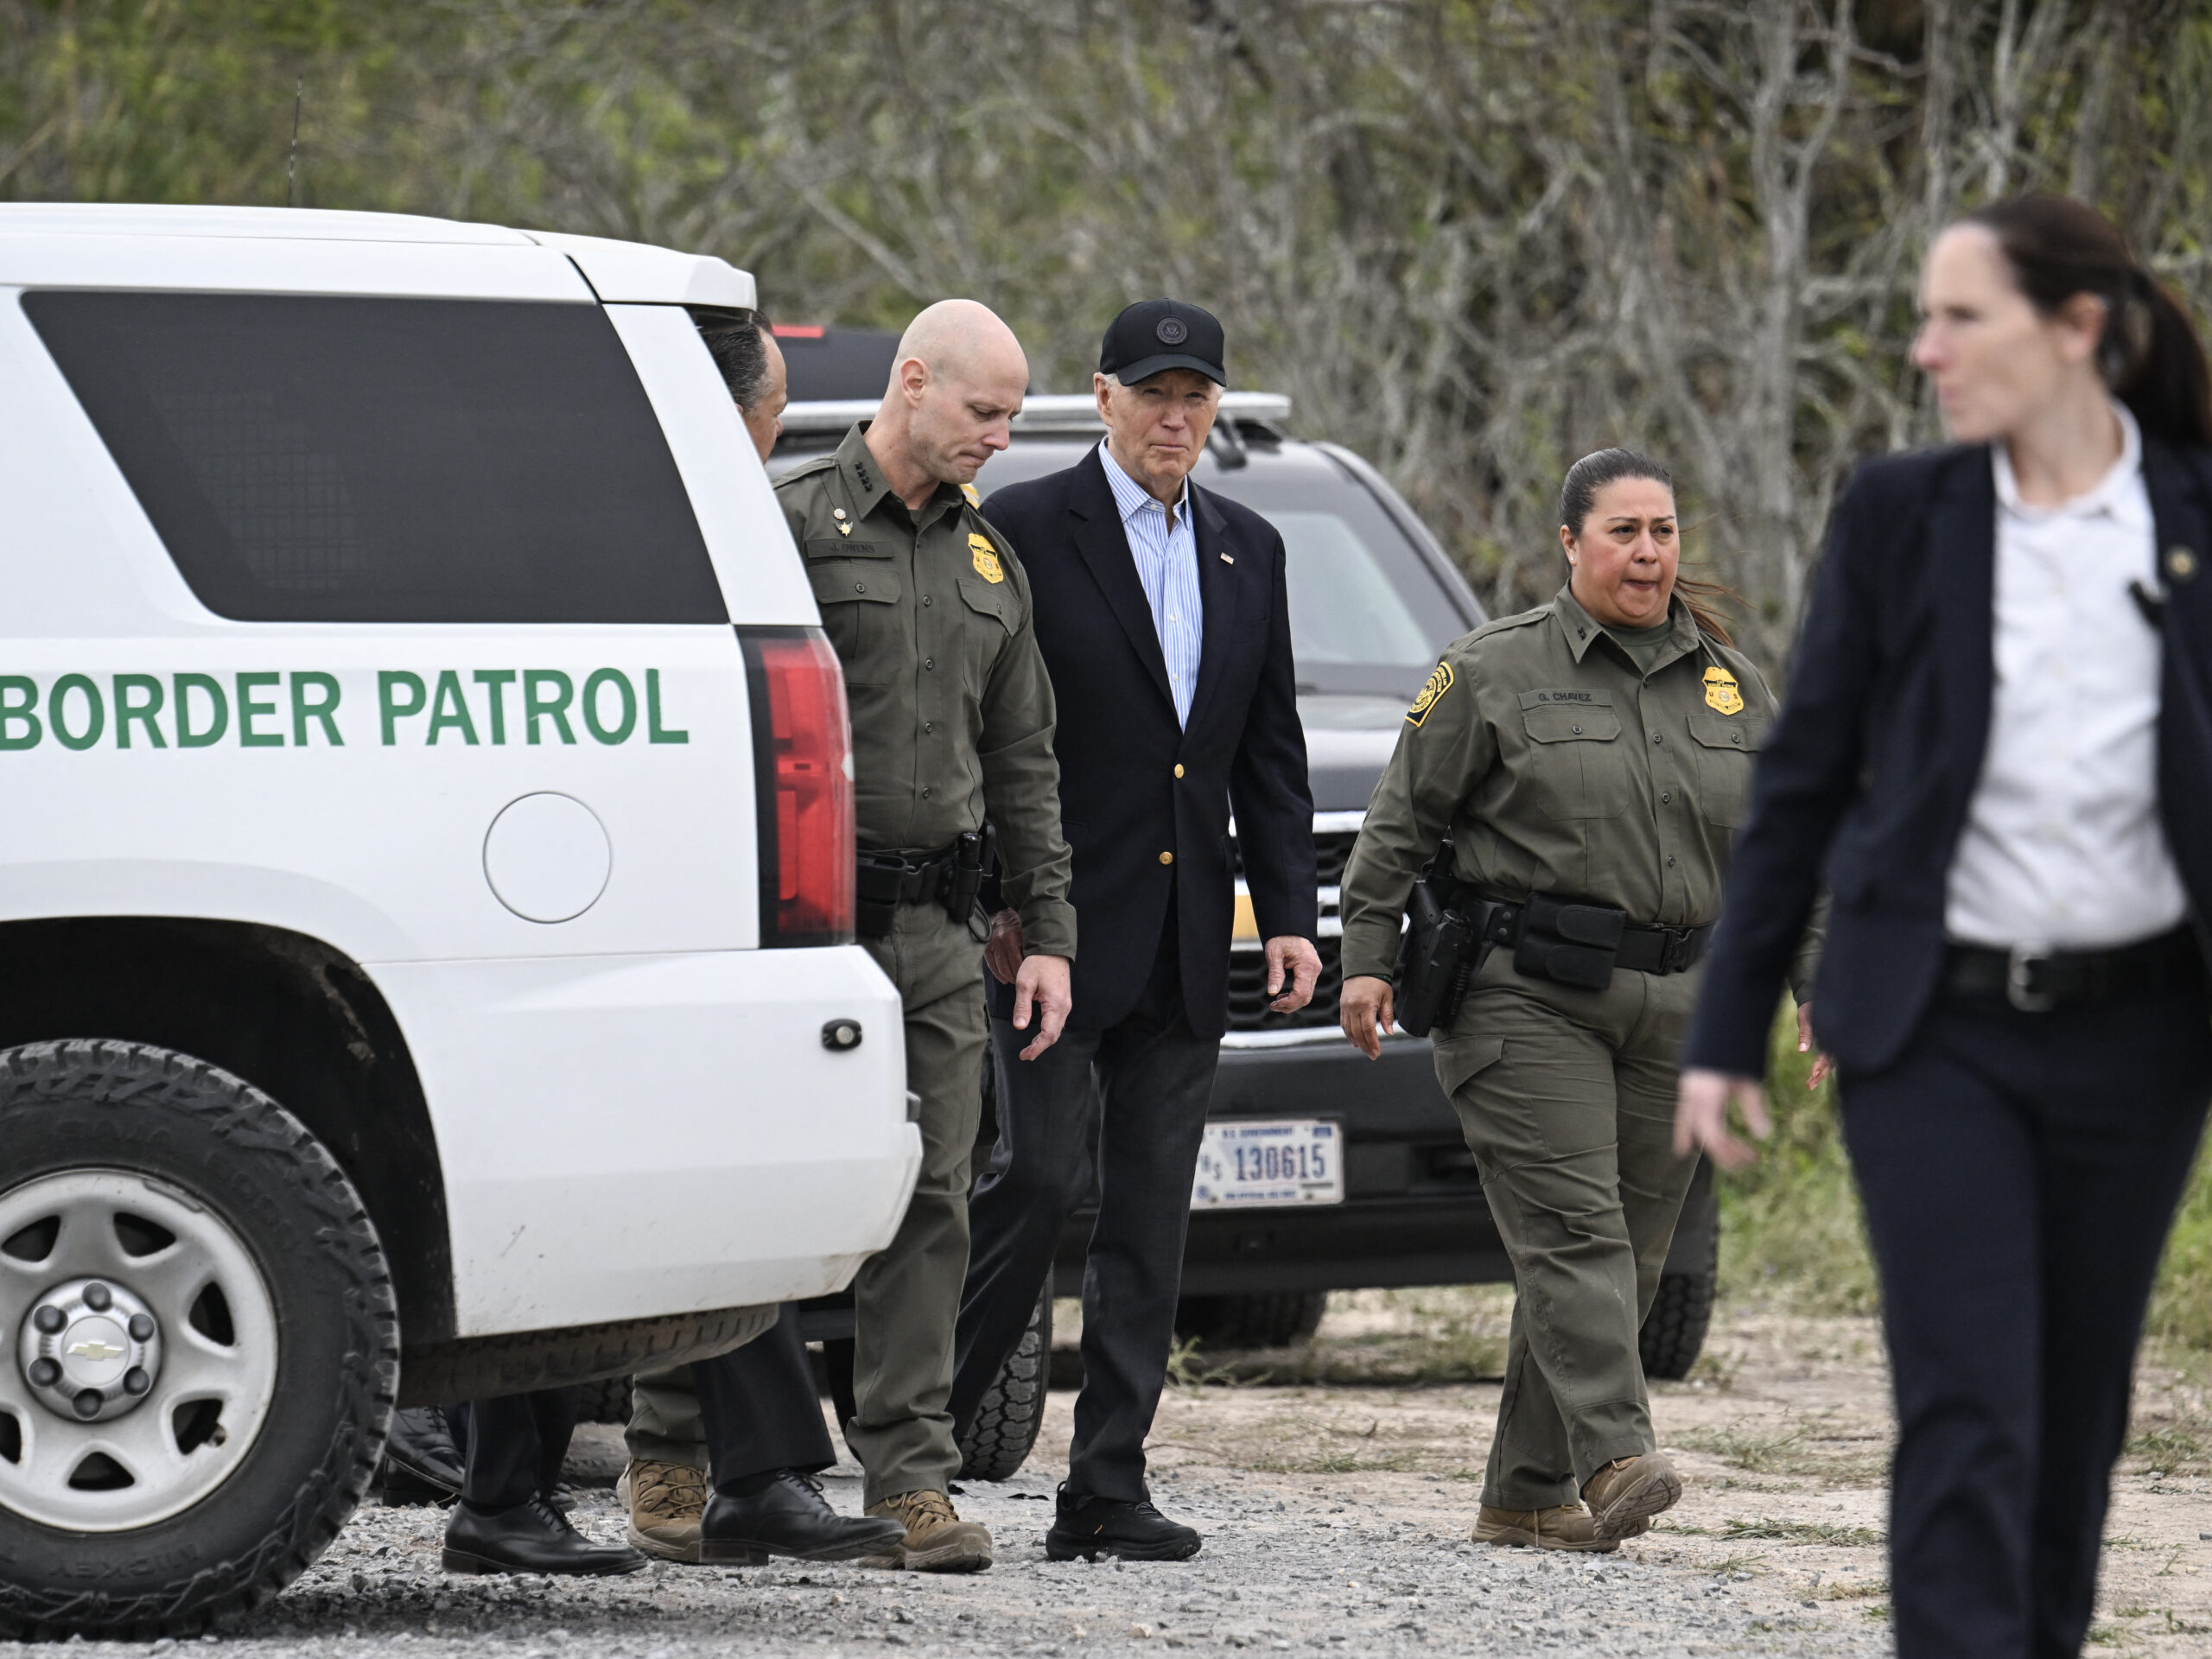 Biden and Trump were both at the border today, staking out ground on a key 2024 issue